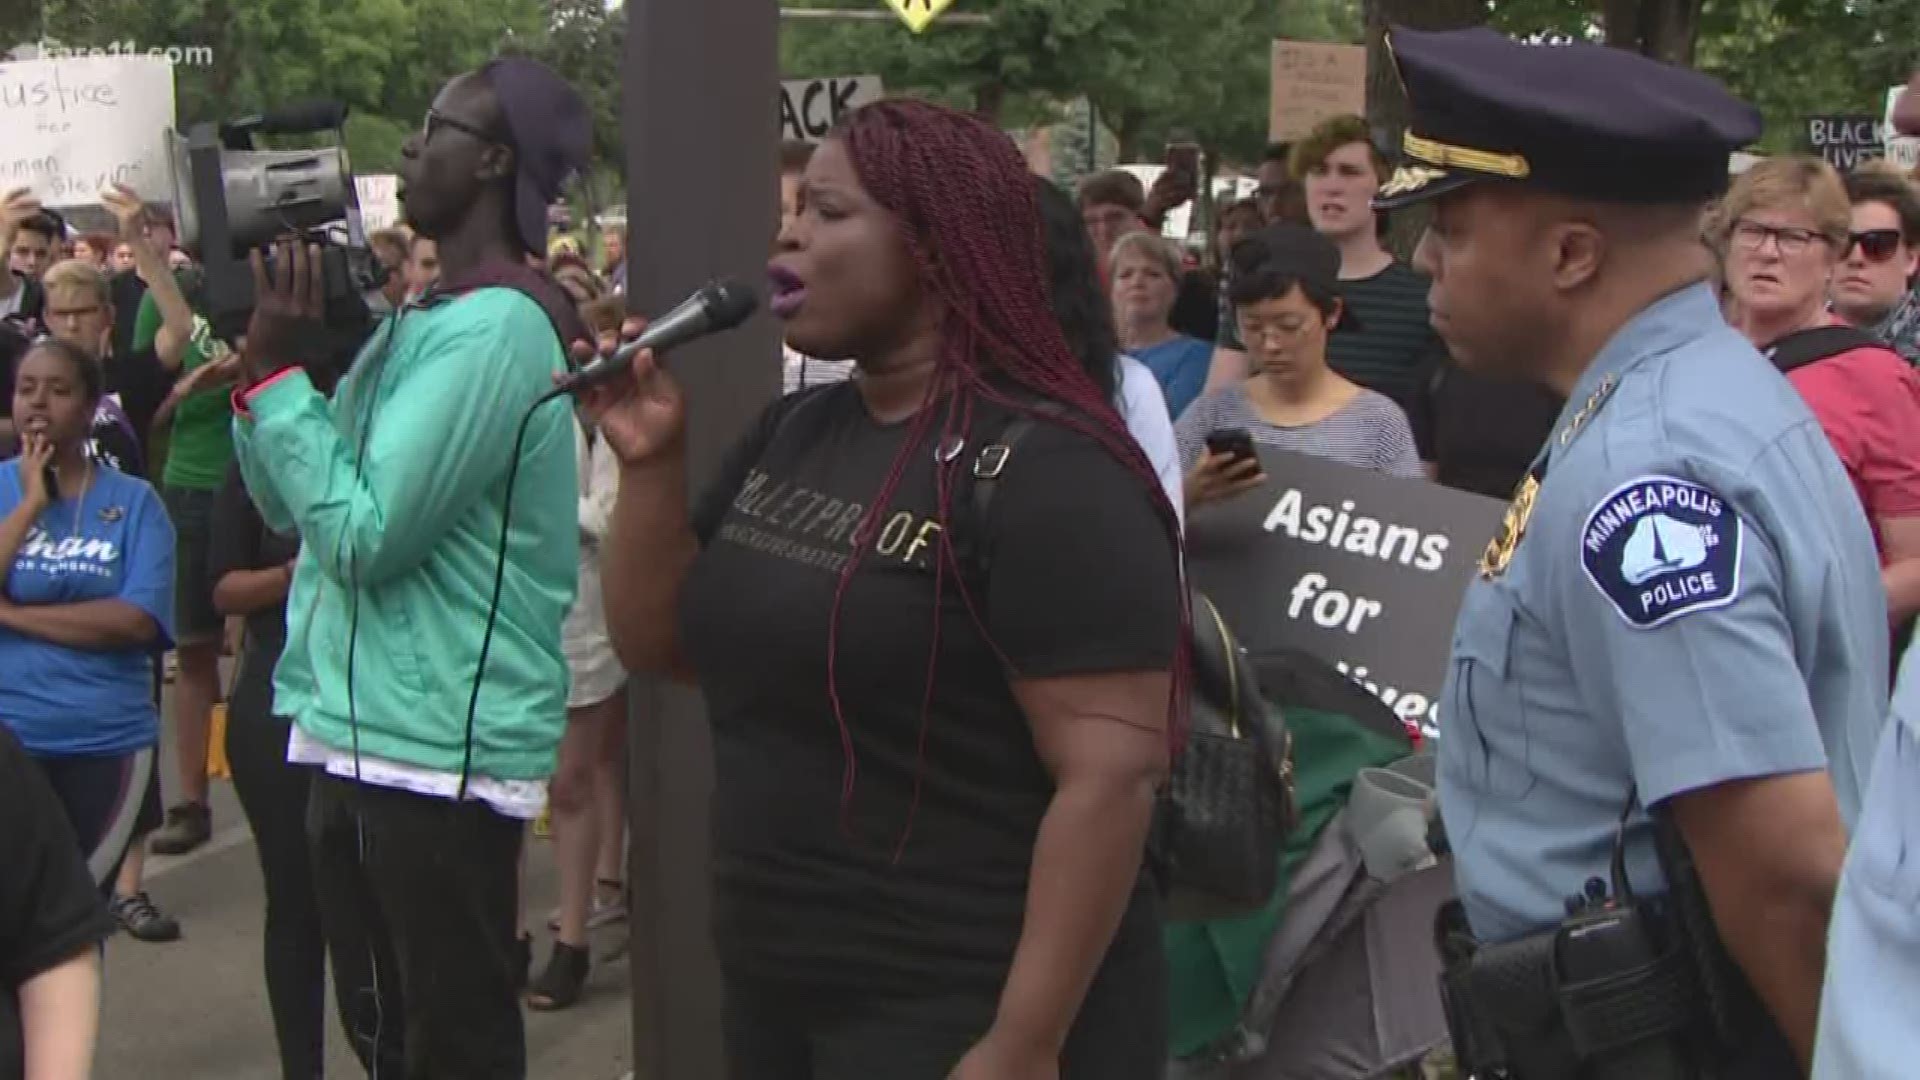 Protesters gathered outside the Fourth Precinct in Minneapolis on Sunday, in response to the police shooting of an African American man on Saturday night. The man's family also spoke out, saying "We just want to know the truth." https://kare11.tv/2yDJEYr